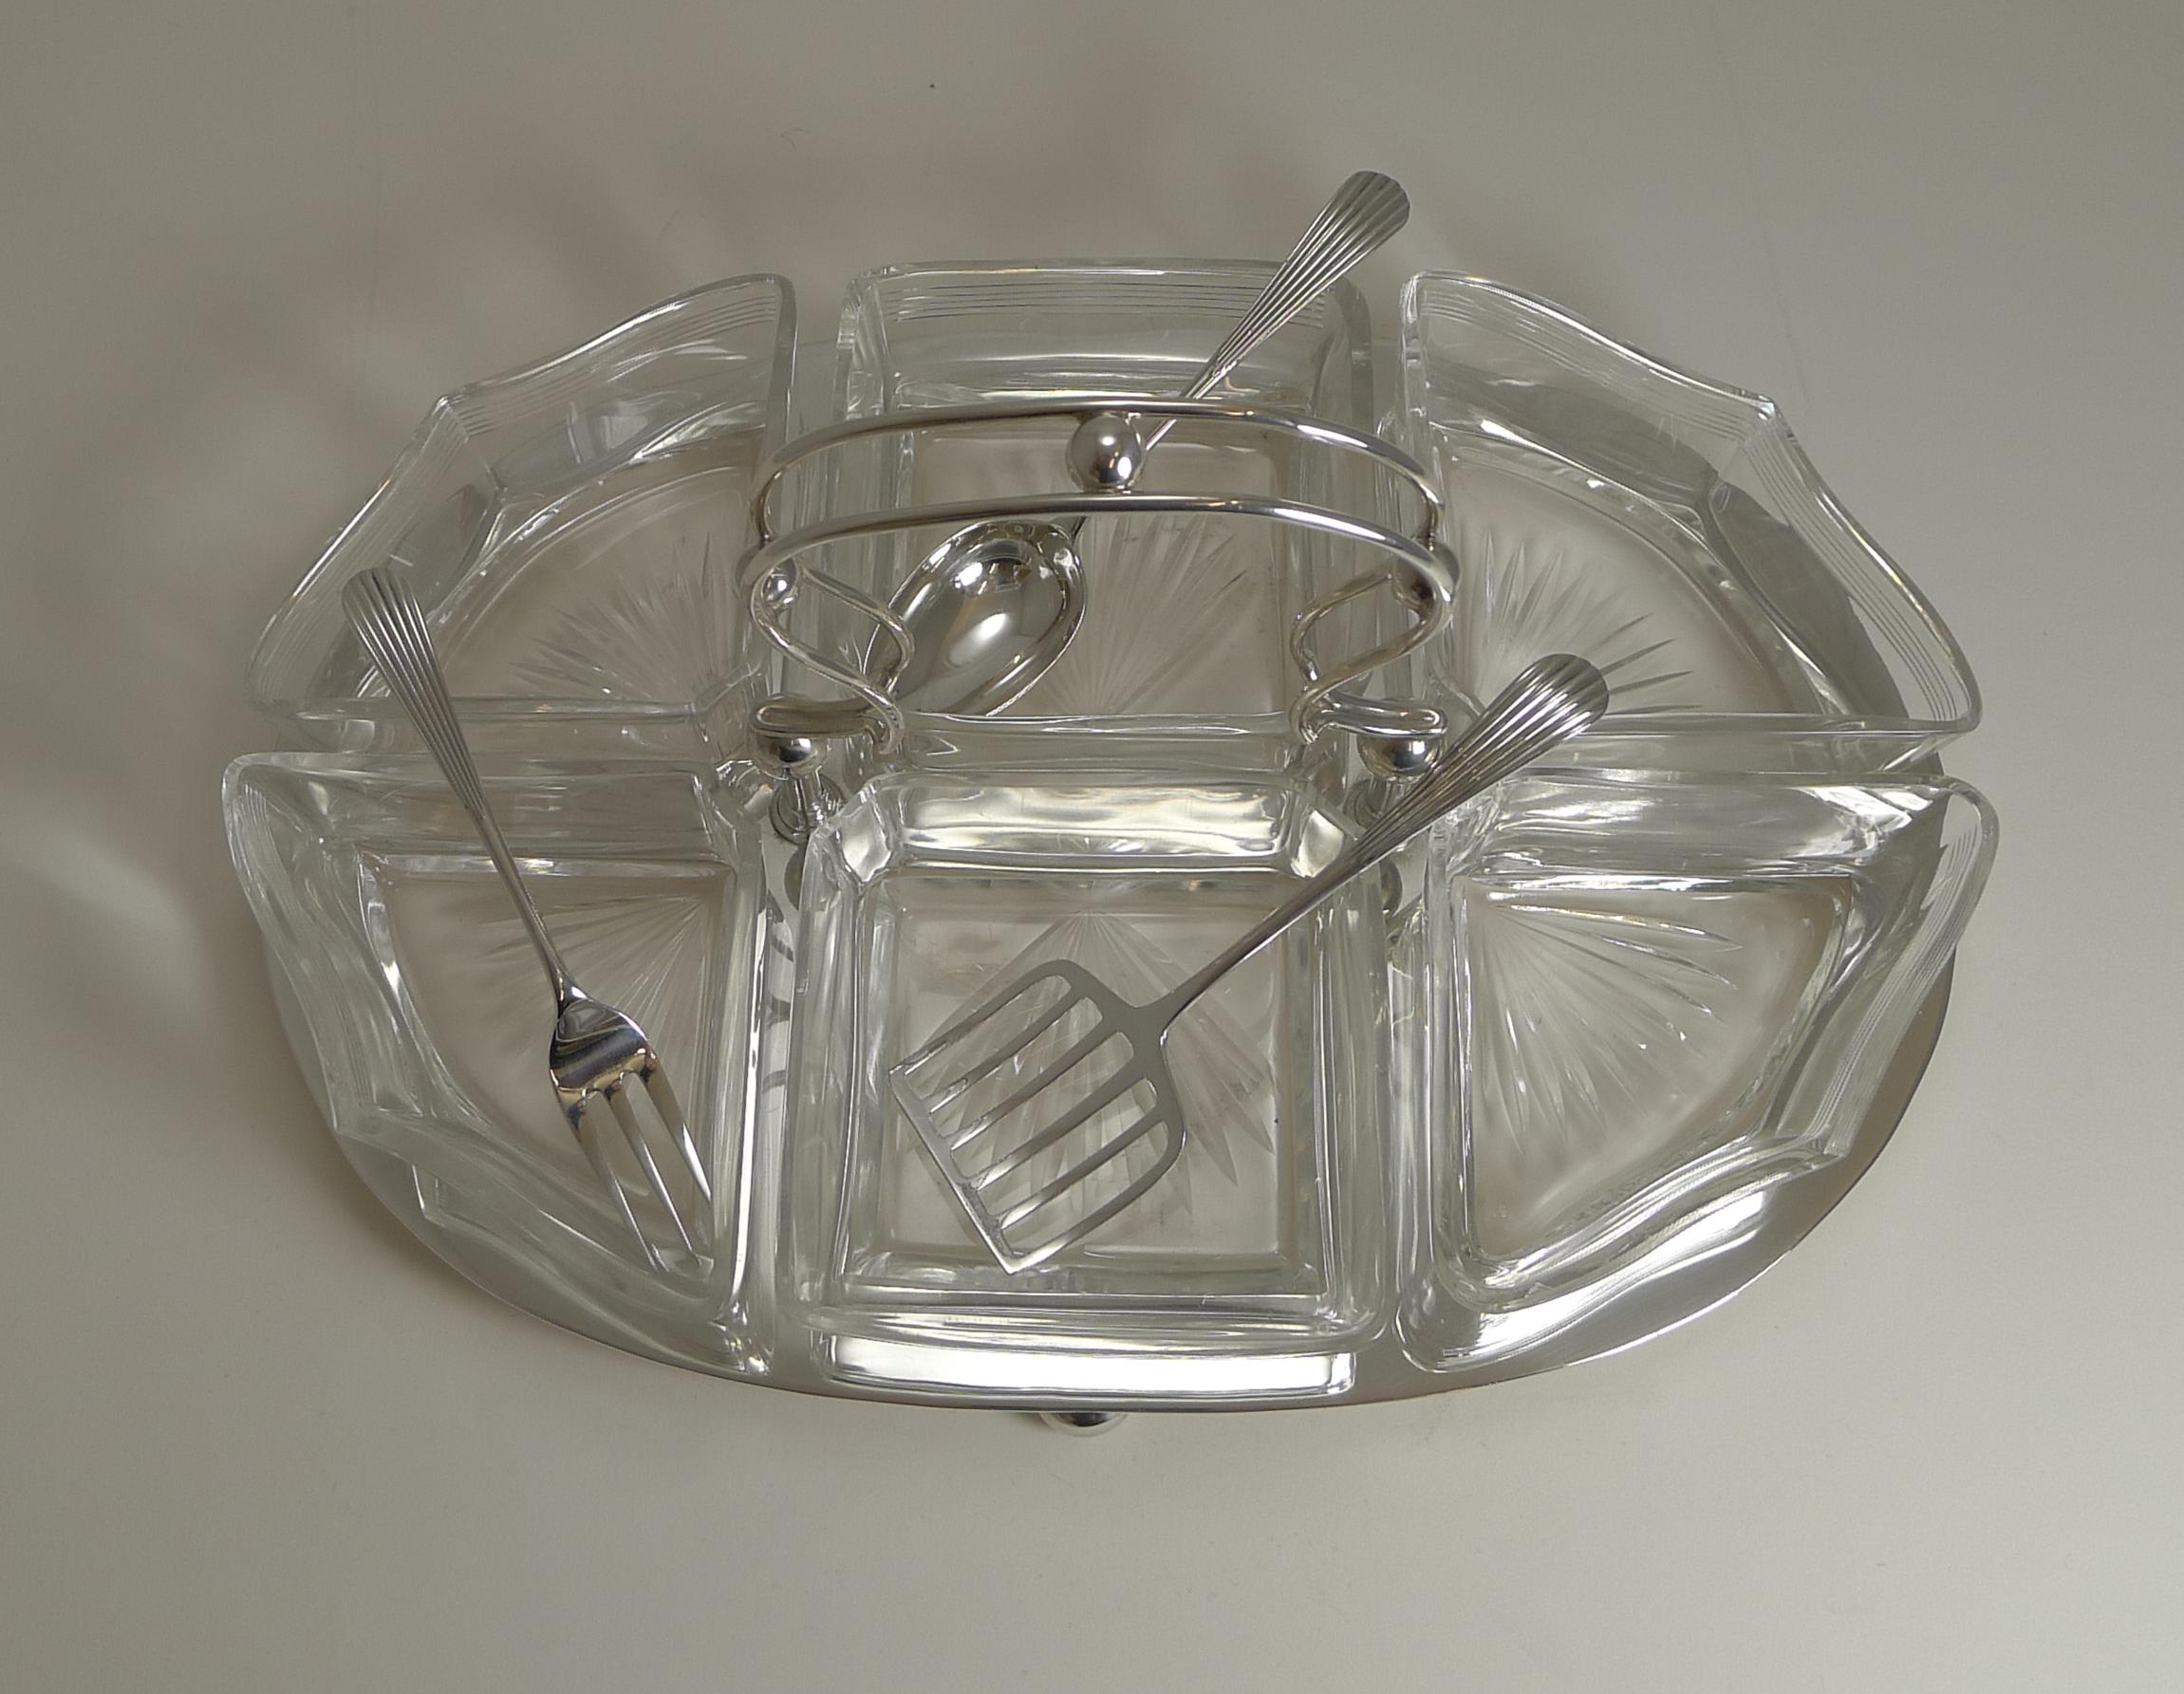 English Sterling Silver and Crystal Hors D'oeuvres / Cocktail Dish, James Dixon 1